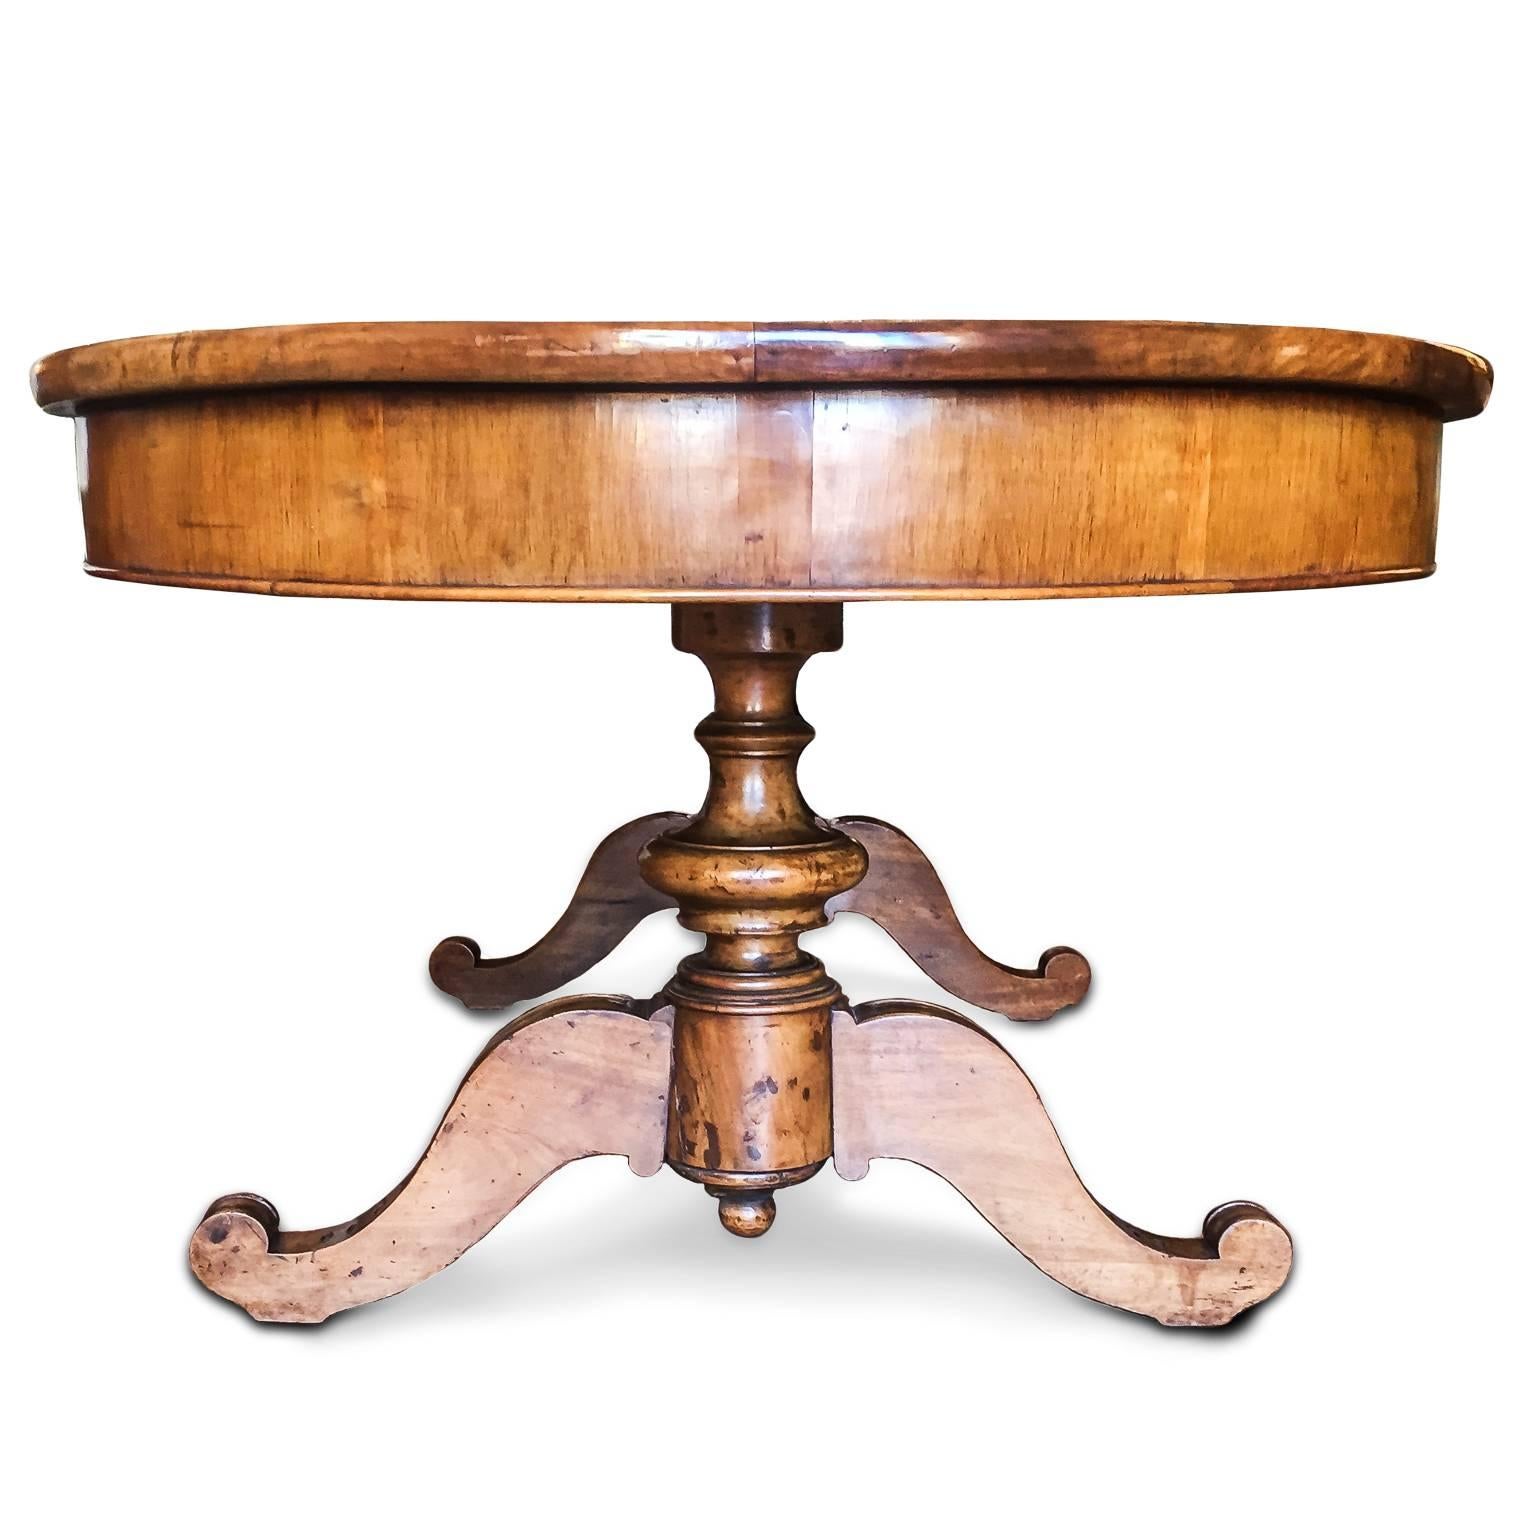 Carved Mid-19th Century Italian Walnut Dining Center Table with Wide Oval Veneered Top